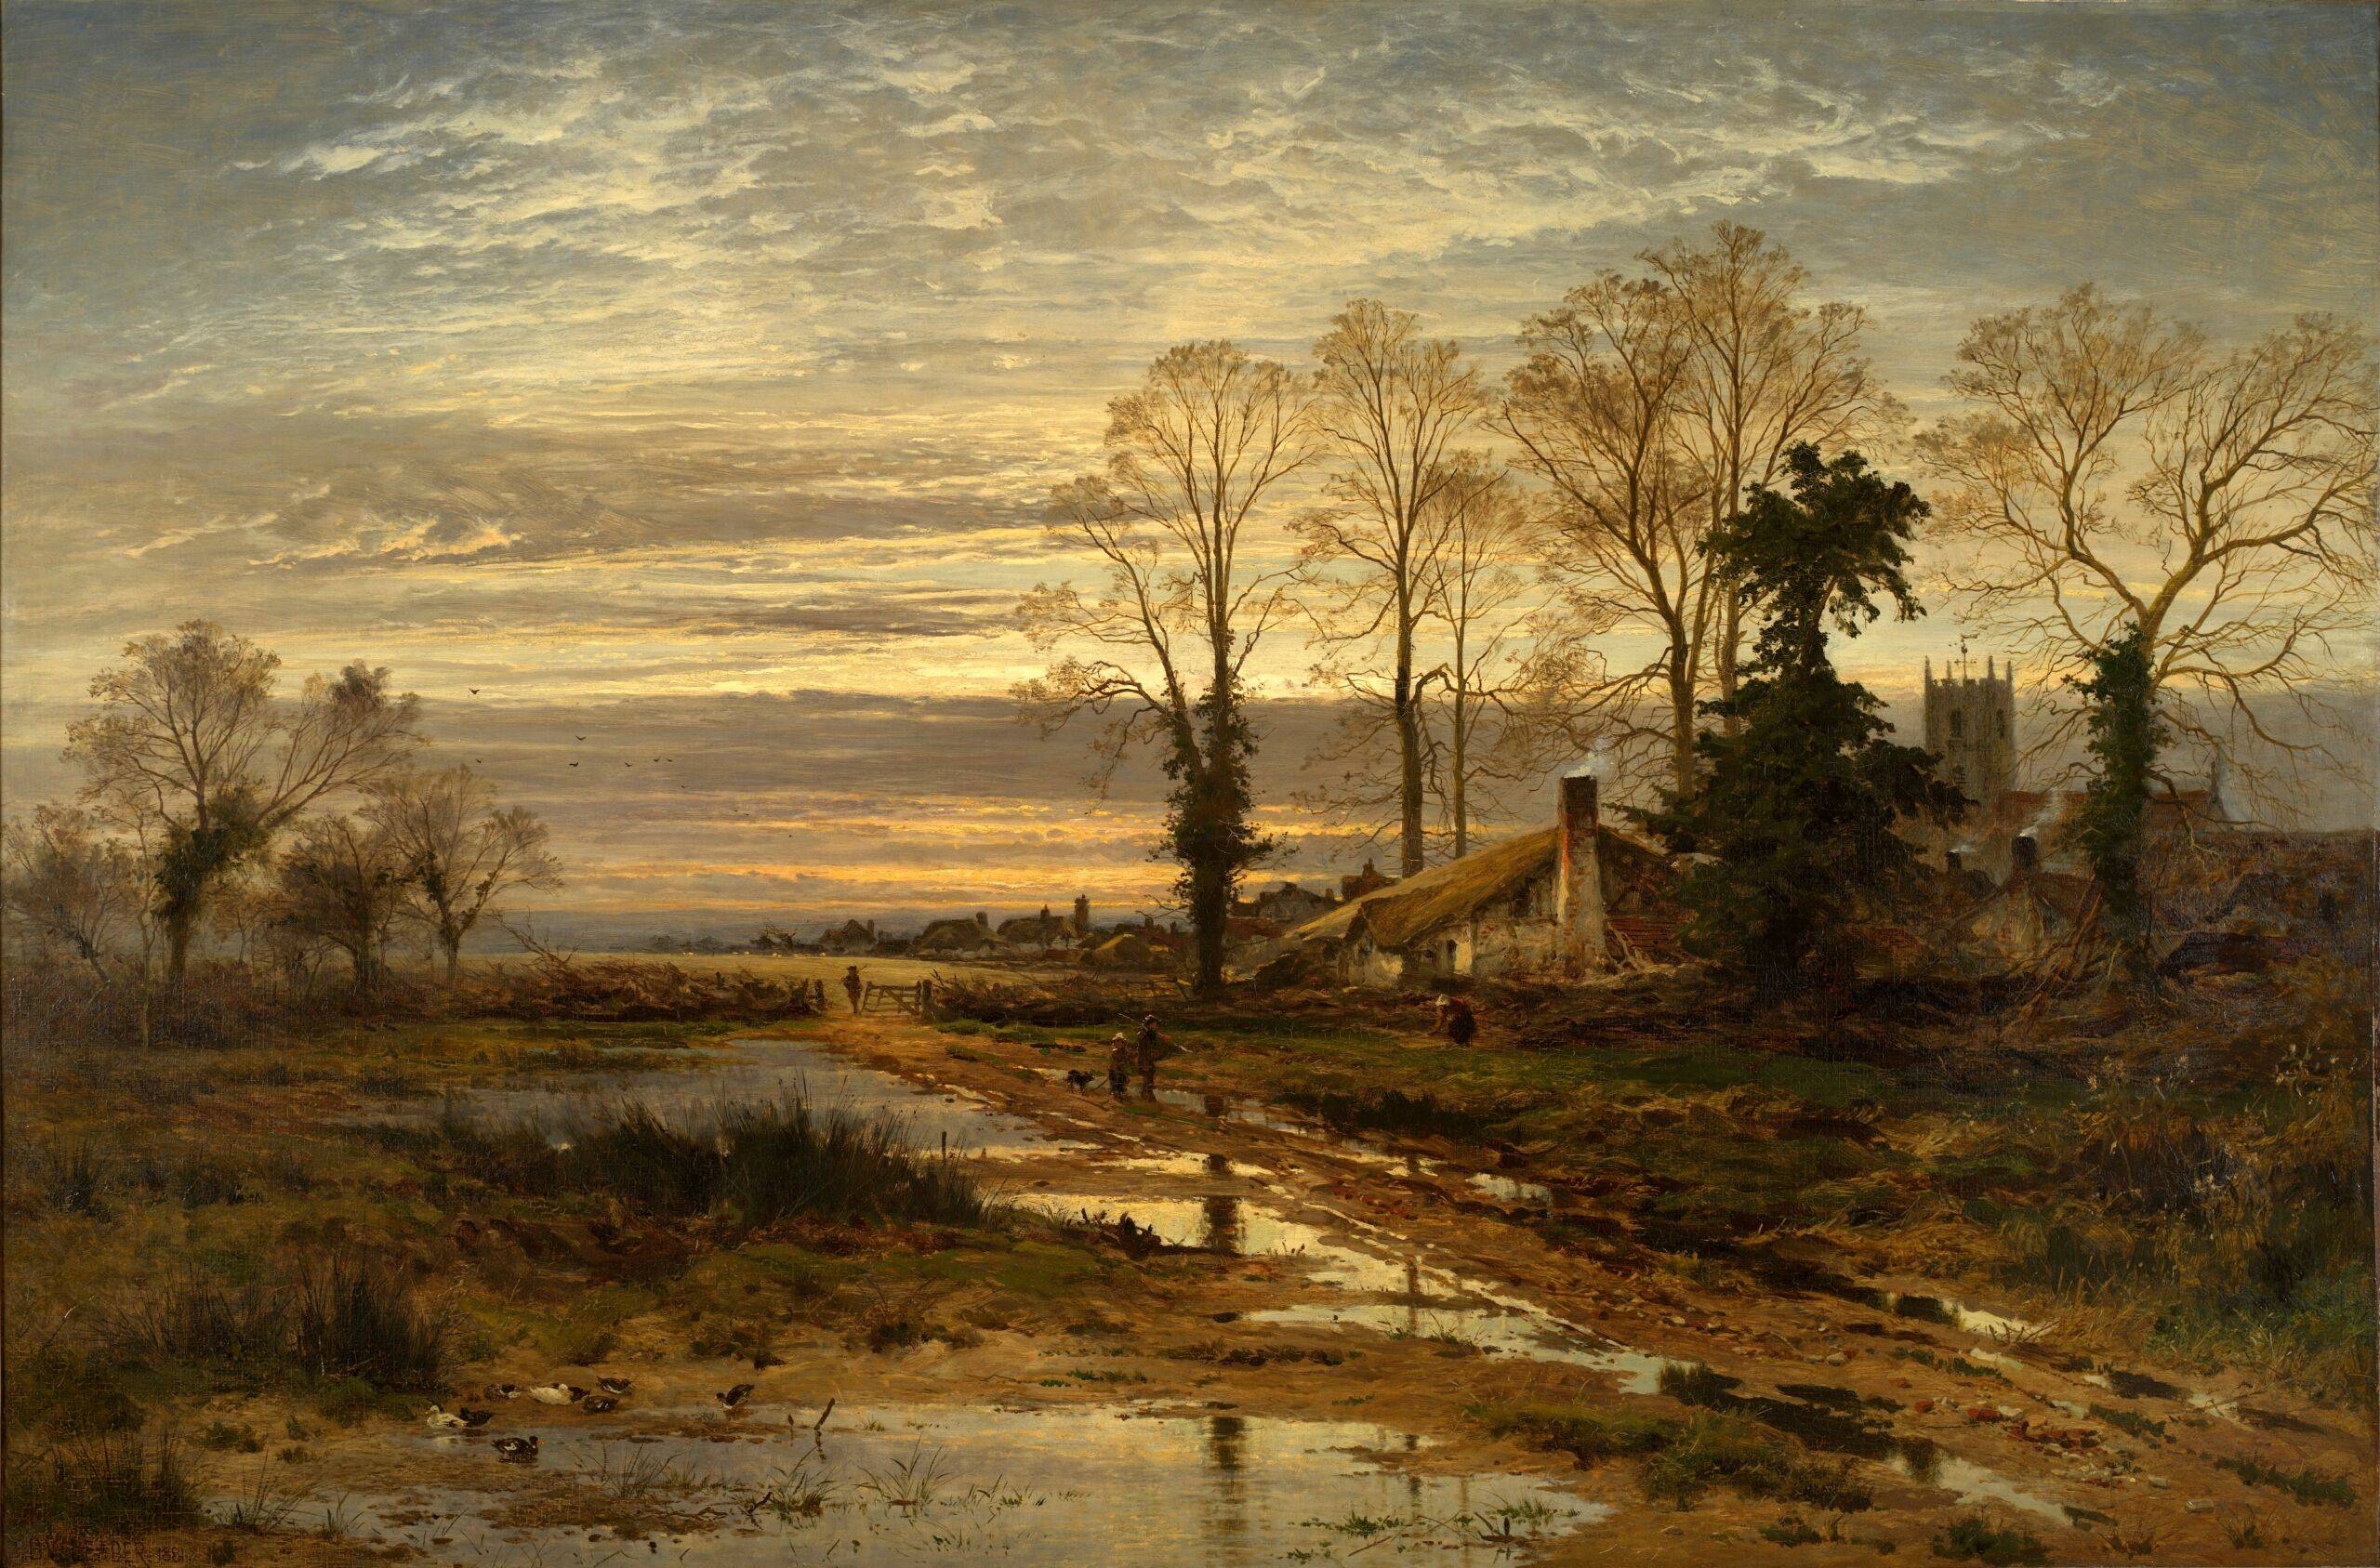 Landscape painting, 'February Fill Dyke', by Benjamin Williams Leader. In one of the winter exhibitions 2023.